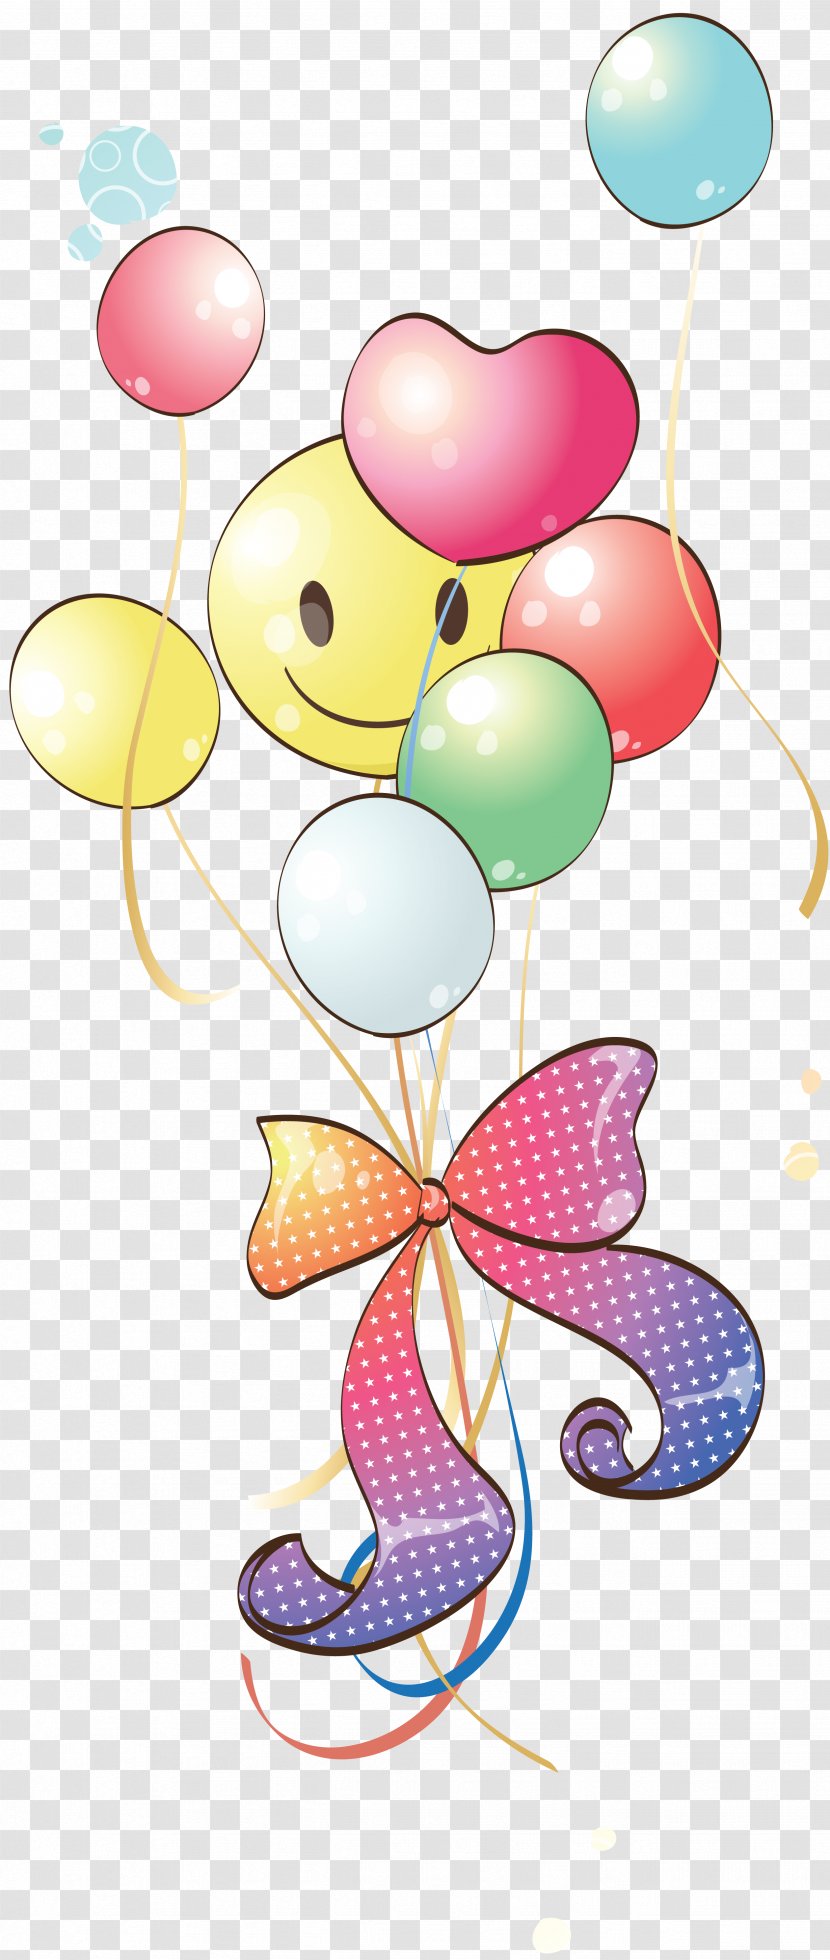 Toy Balloon Clip Art Transparent PNG